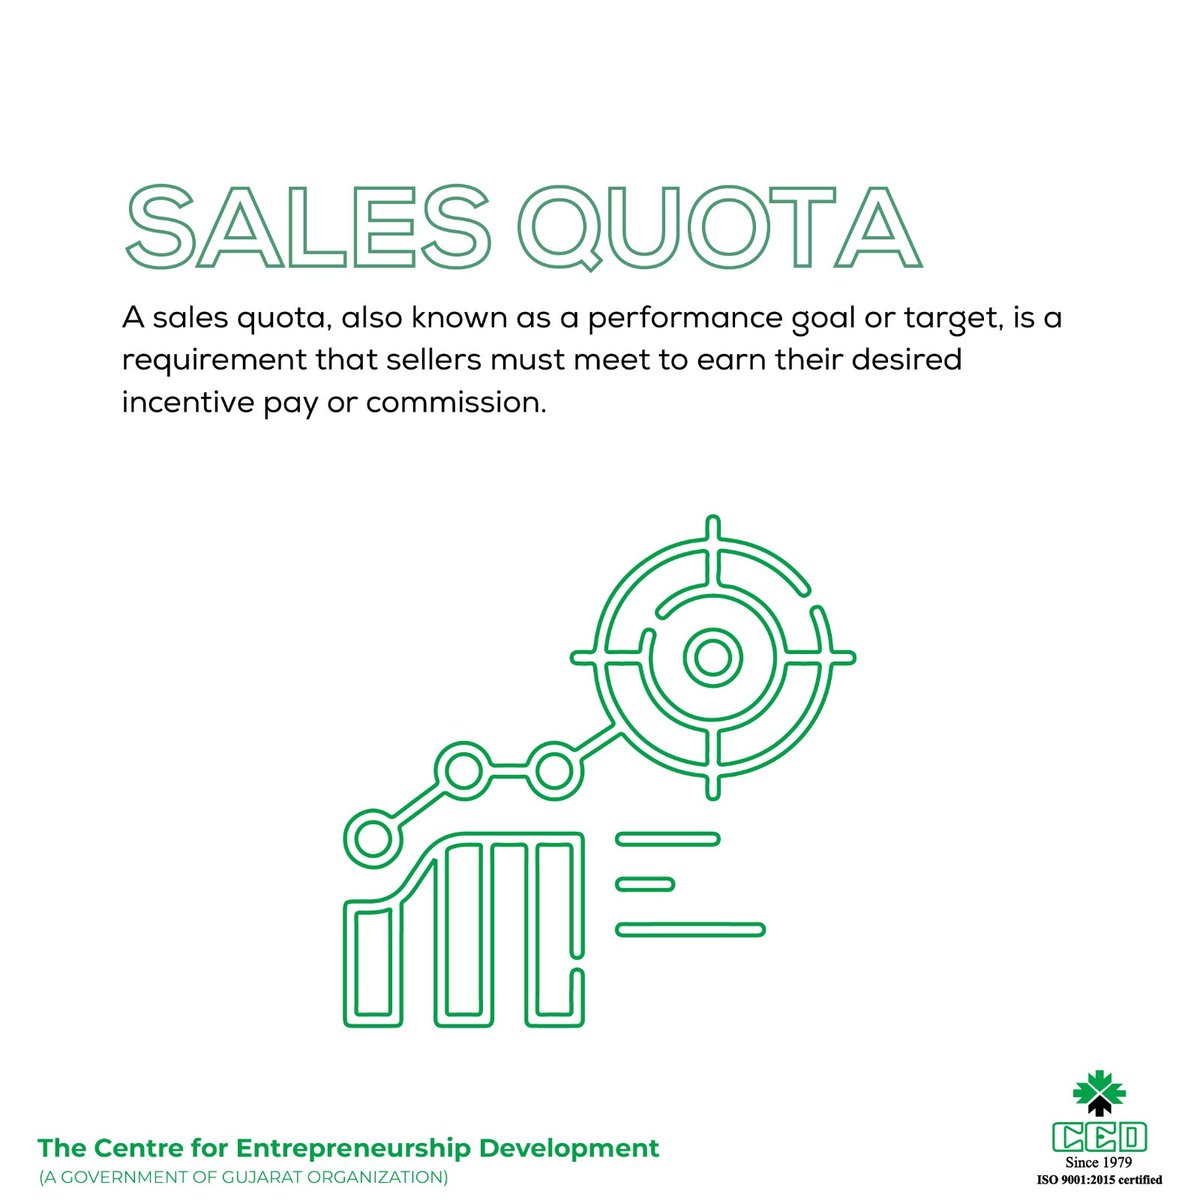 A sales quota is a crucial benchmark that drives success and motivation in sales. Know what is meant by Sales Quota:

#EntrepreneurMindset #businessterms #SalesQuota #entrepreneur #cedgujarat #gujarat #entrepreneurship #startupterms